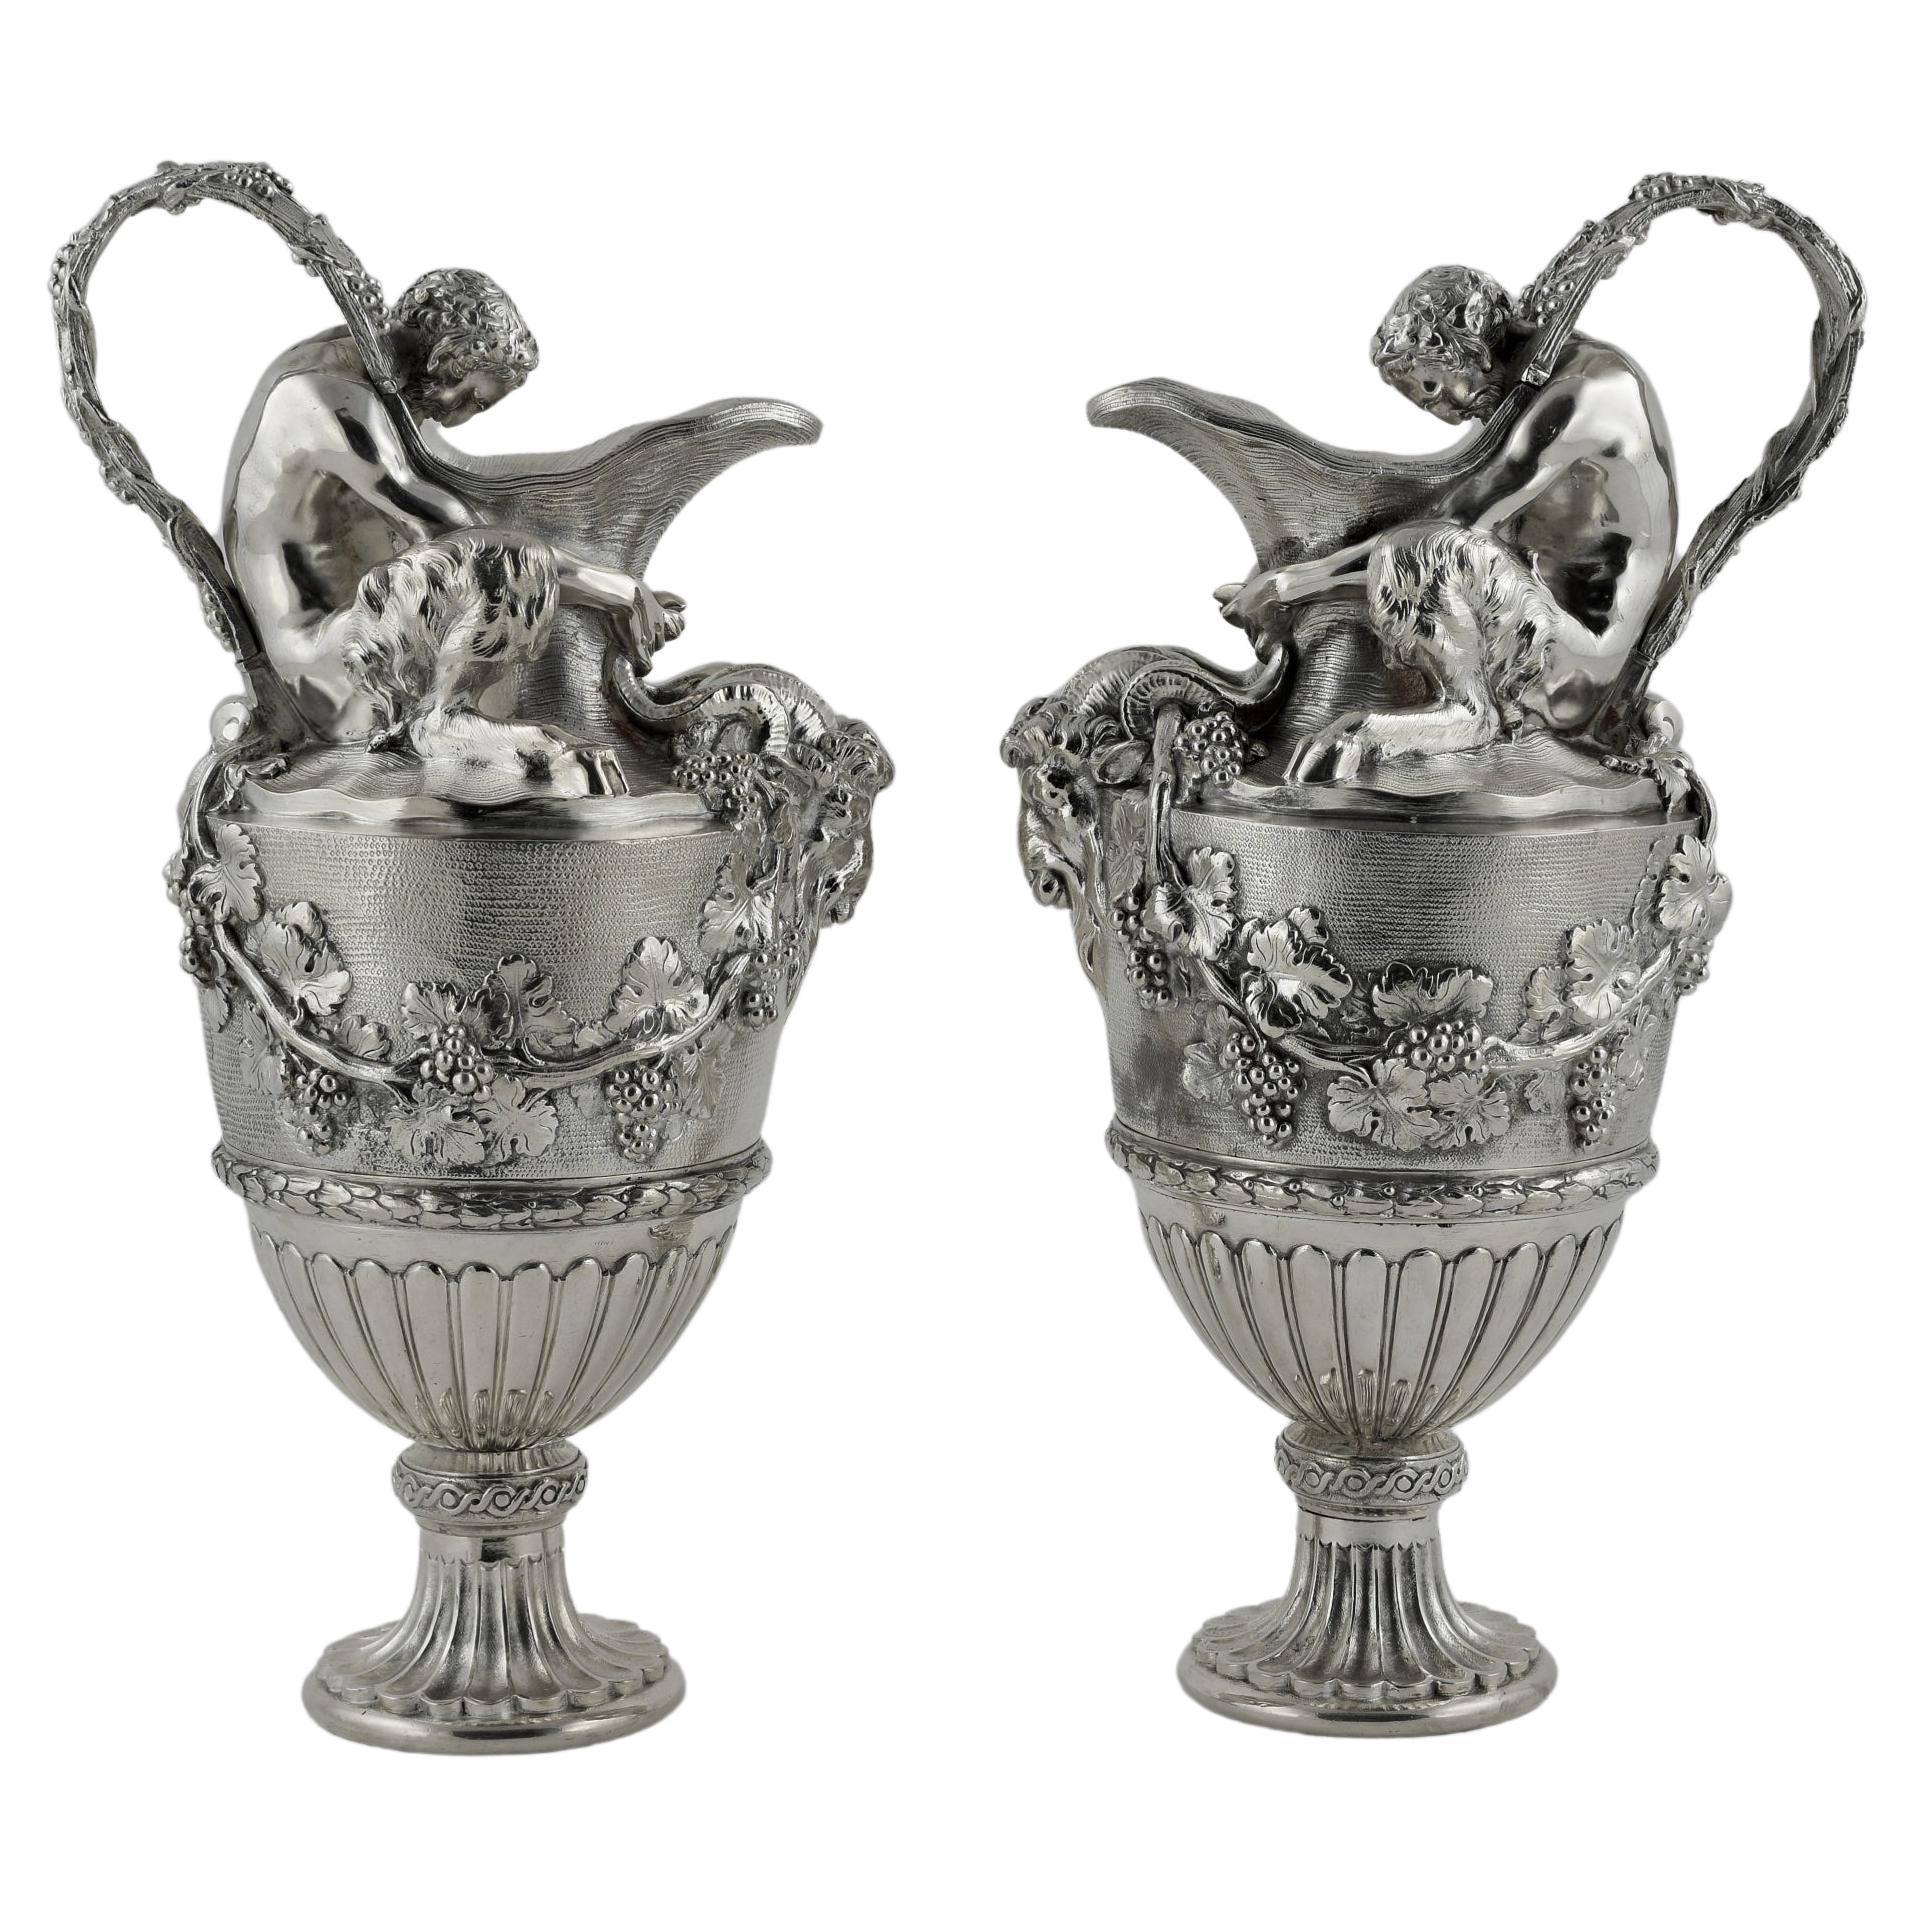 Pair of Decorative Ewer Form Ornaments For Sale